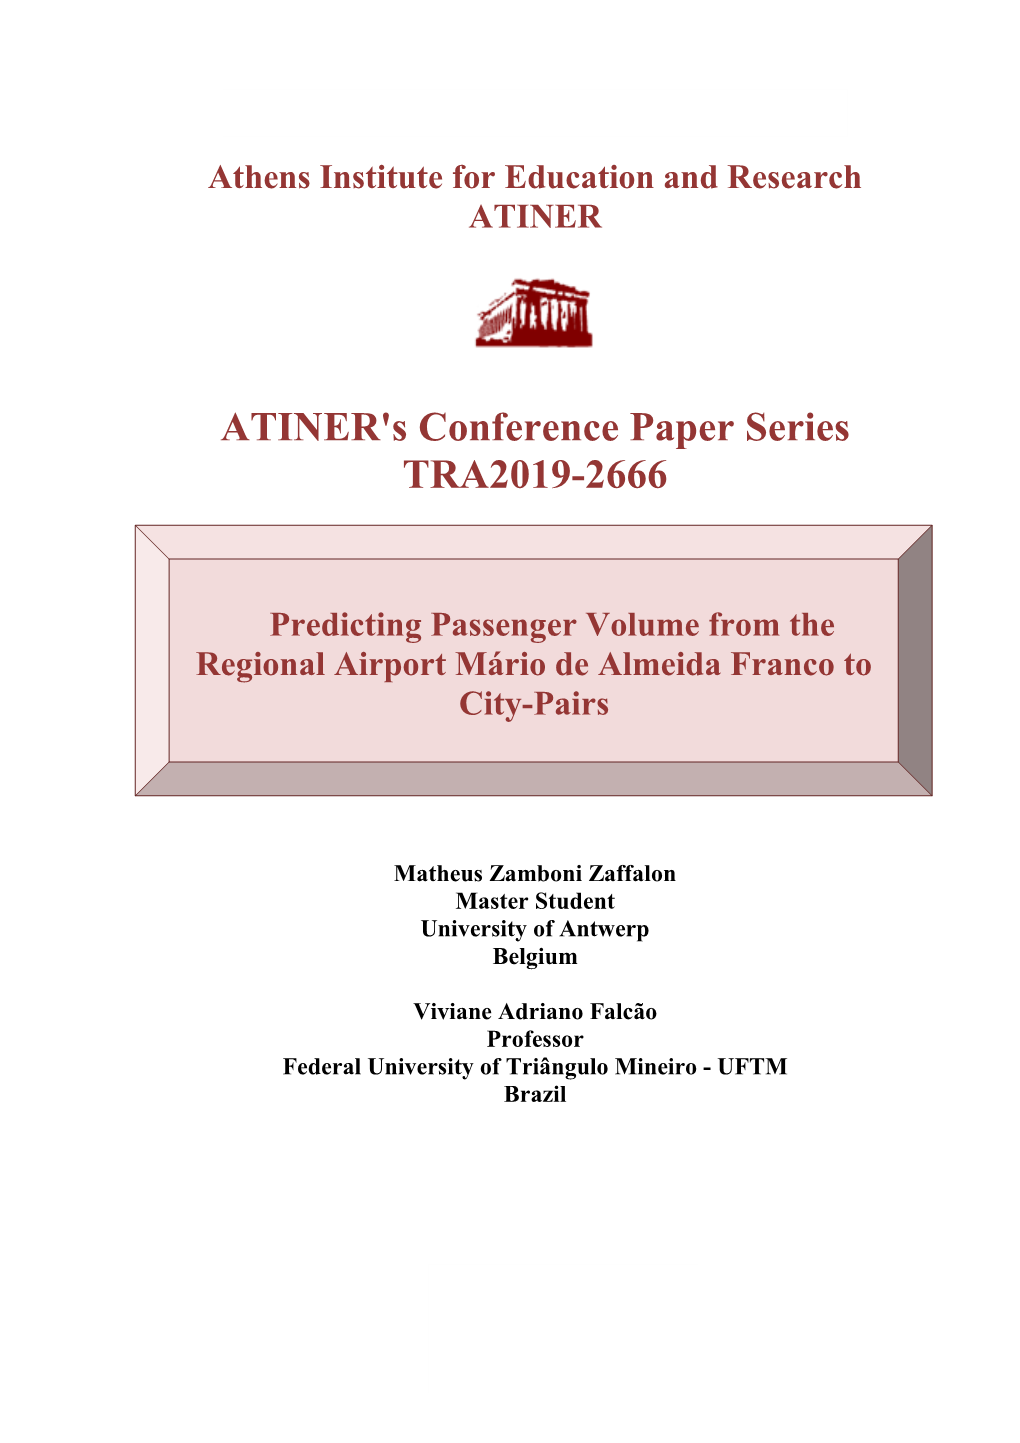 ATINER's Conference Paper Series TRA2019-2666